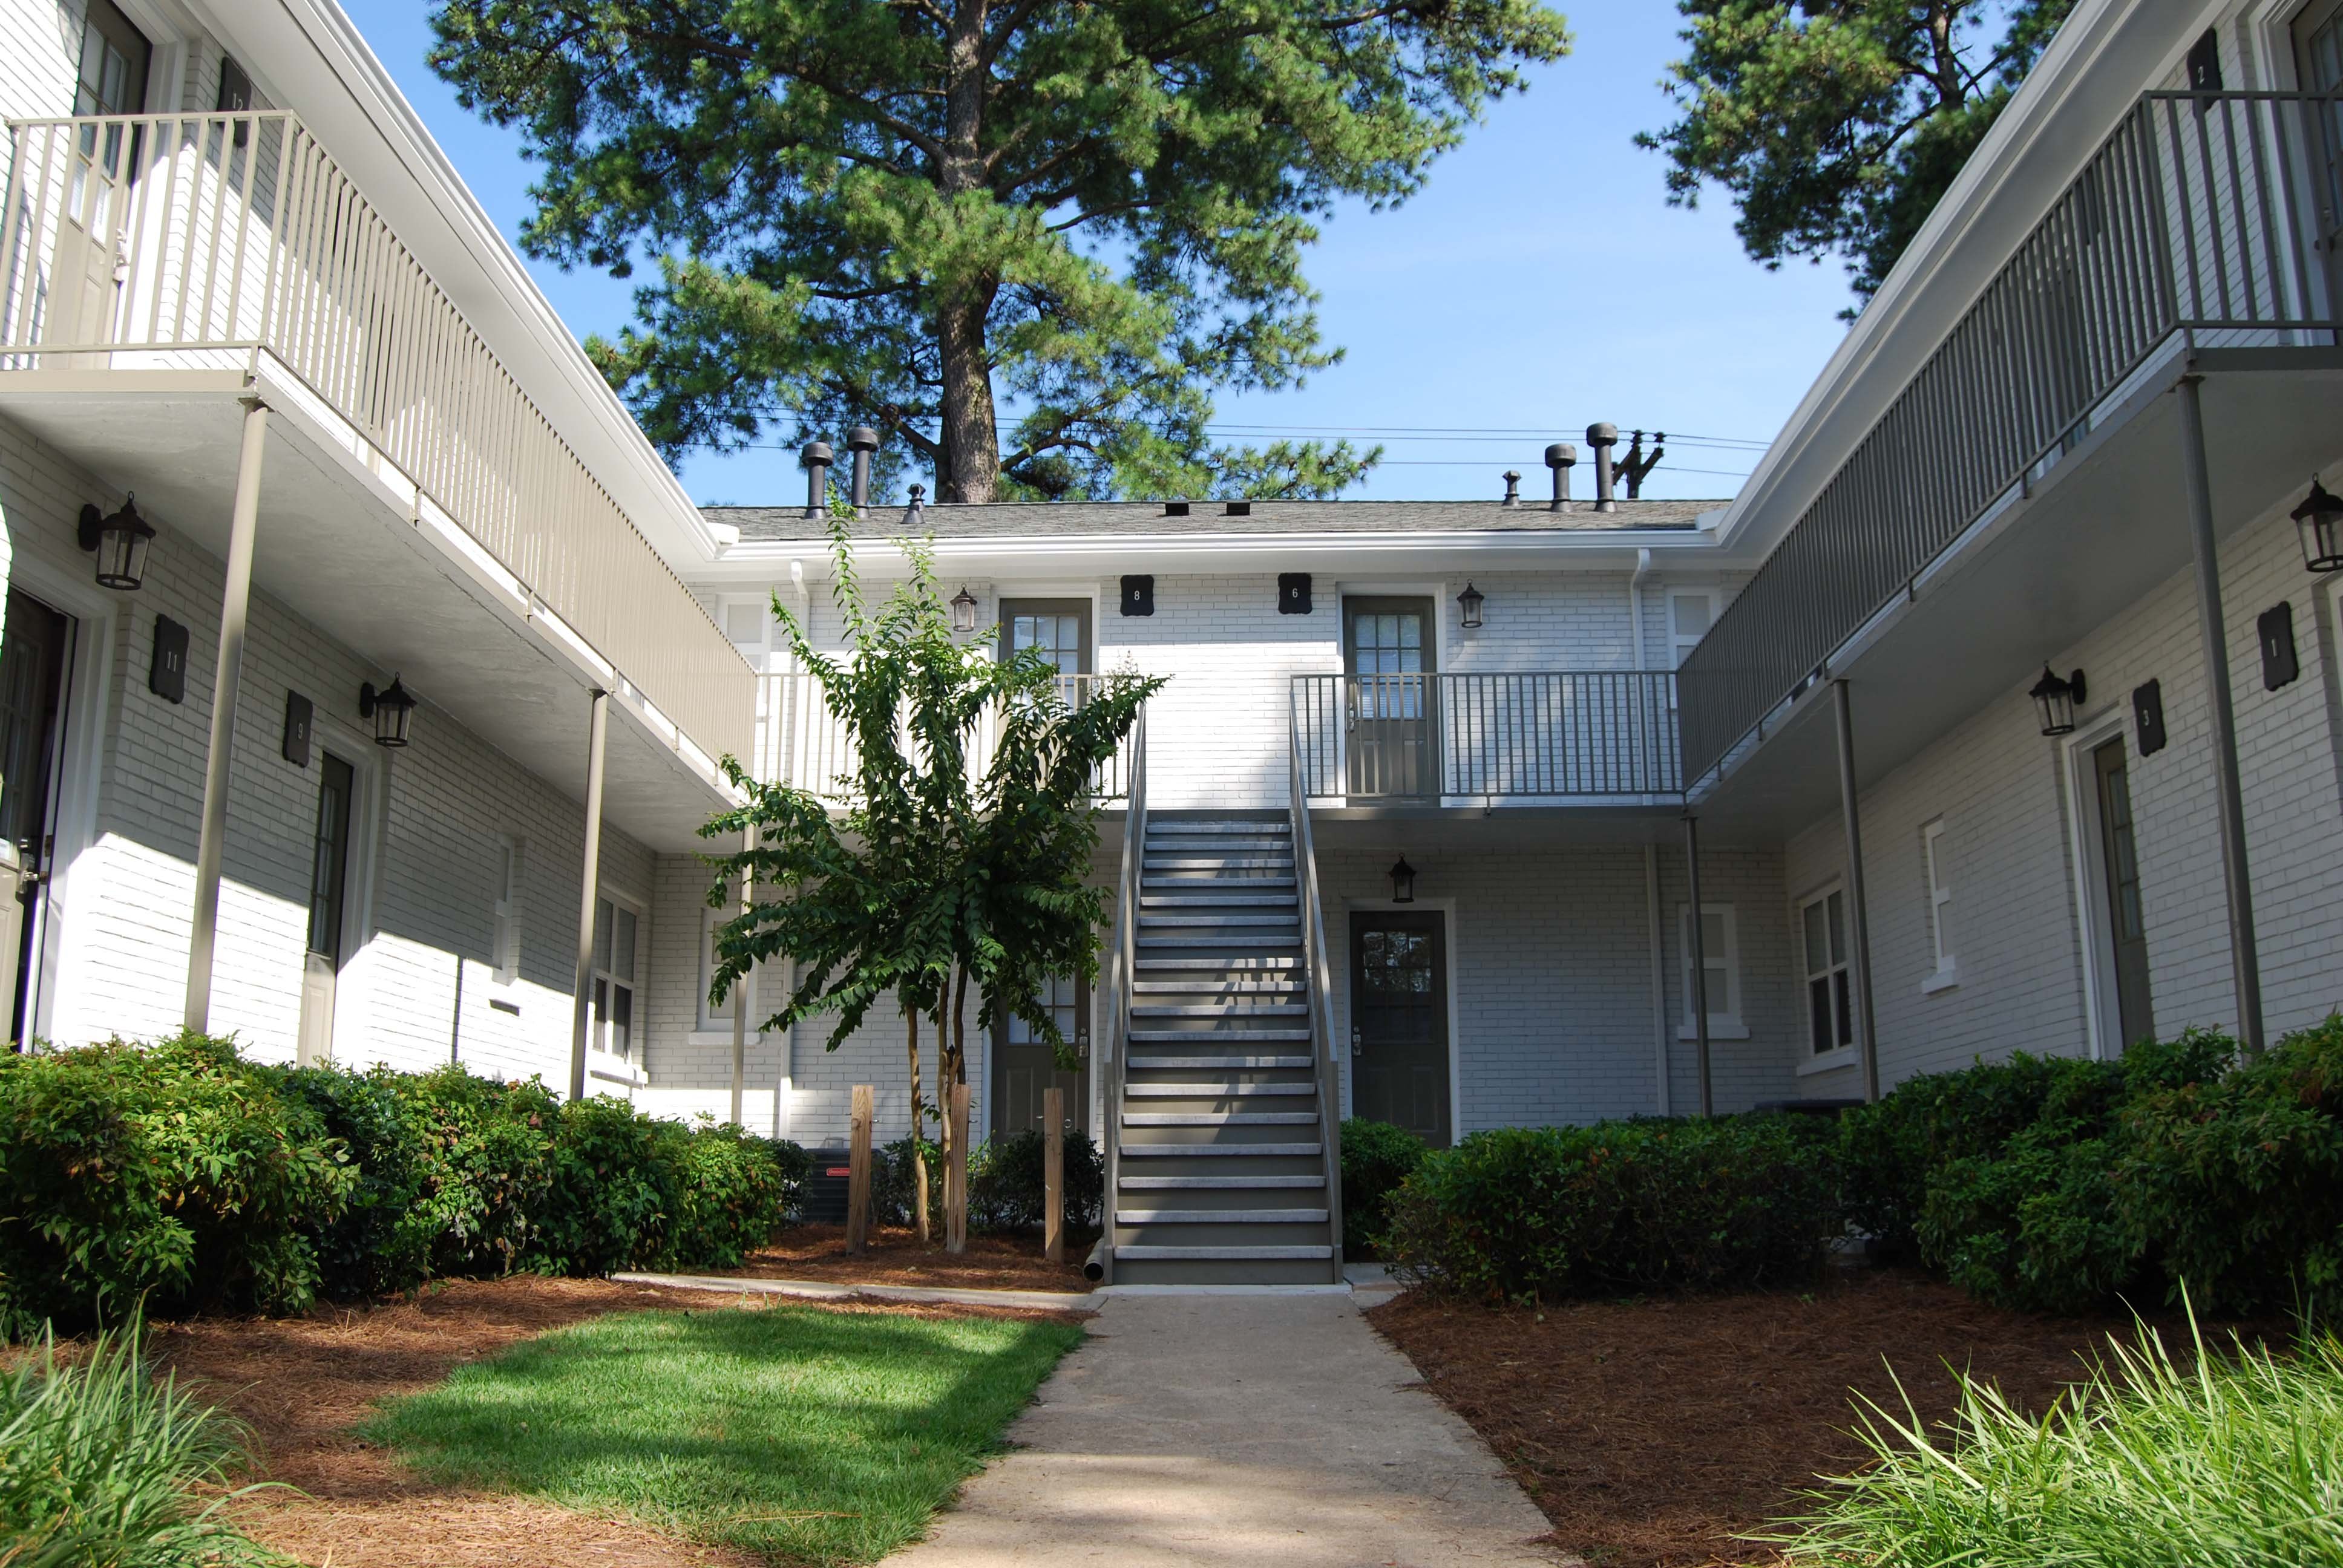 Studios On 25th - Furnished Extended-Stay Apartments / Corporate Apartments / Vacation Rentals image